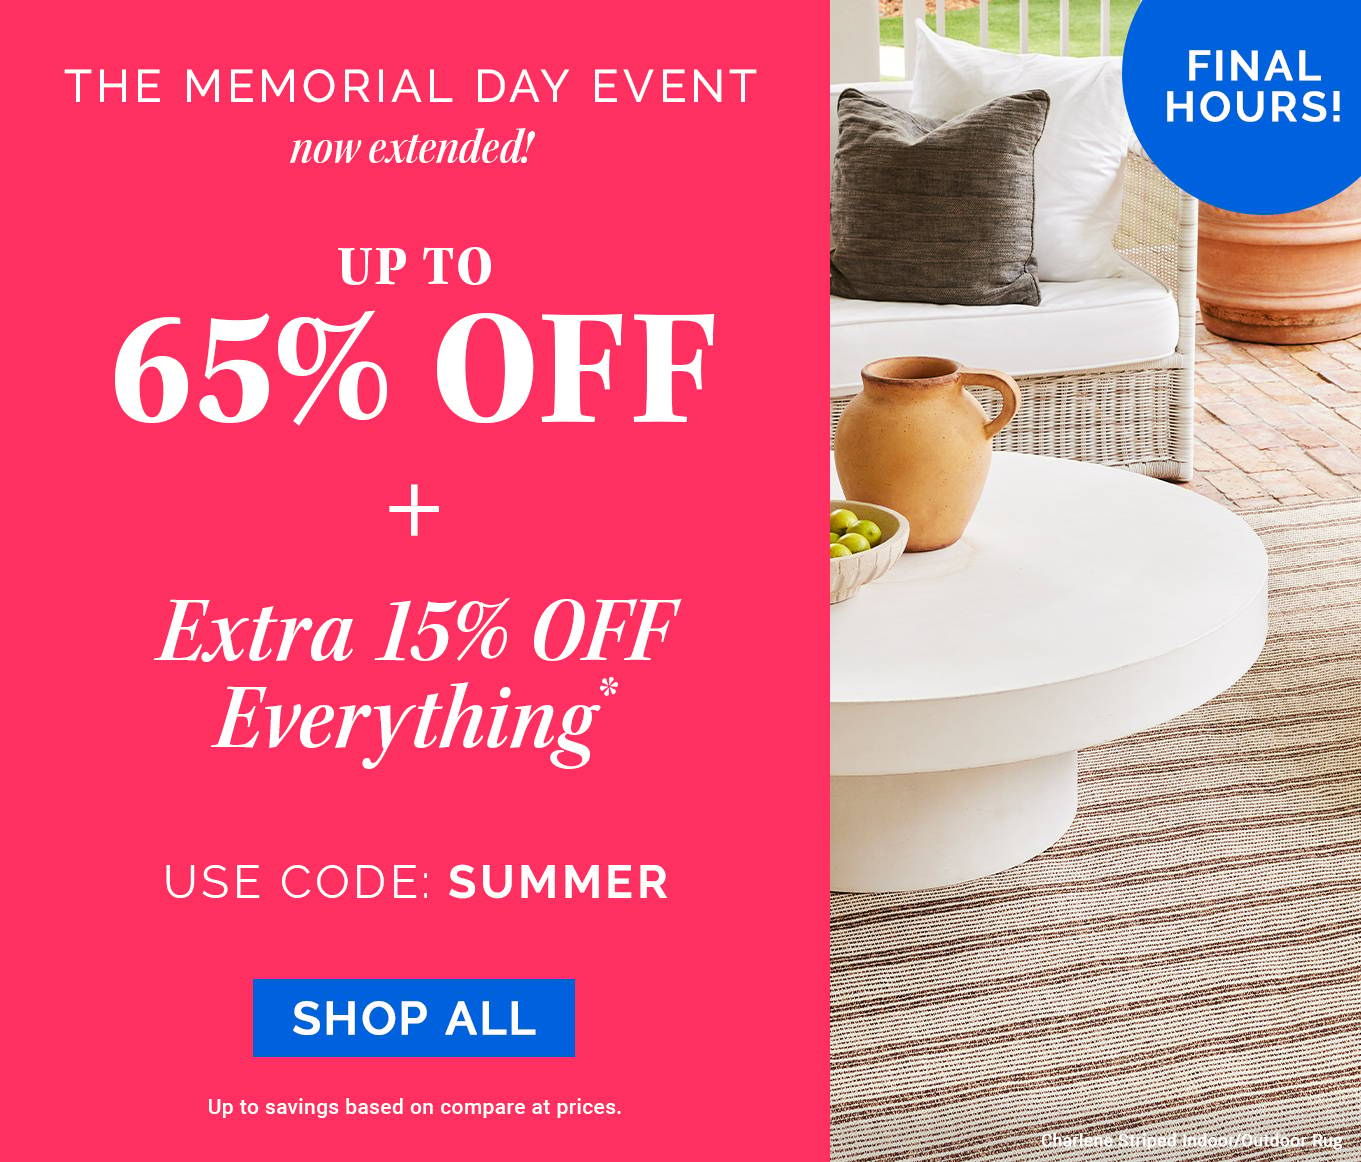 Final Hours! The Memorial Day Event | up to 65% OFF + Extra 15% OFF Everything* | use code: SUMMER